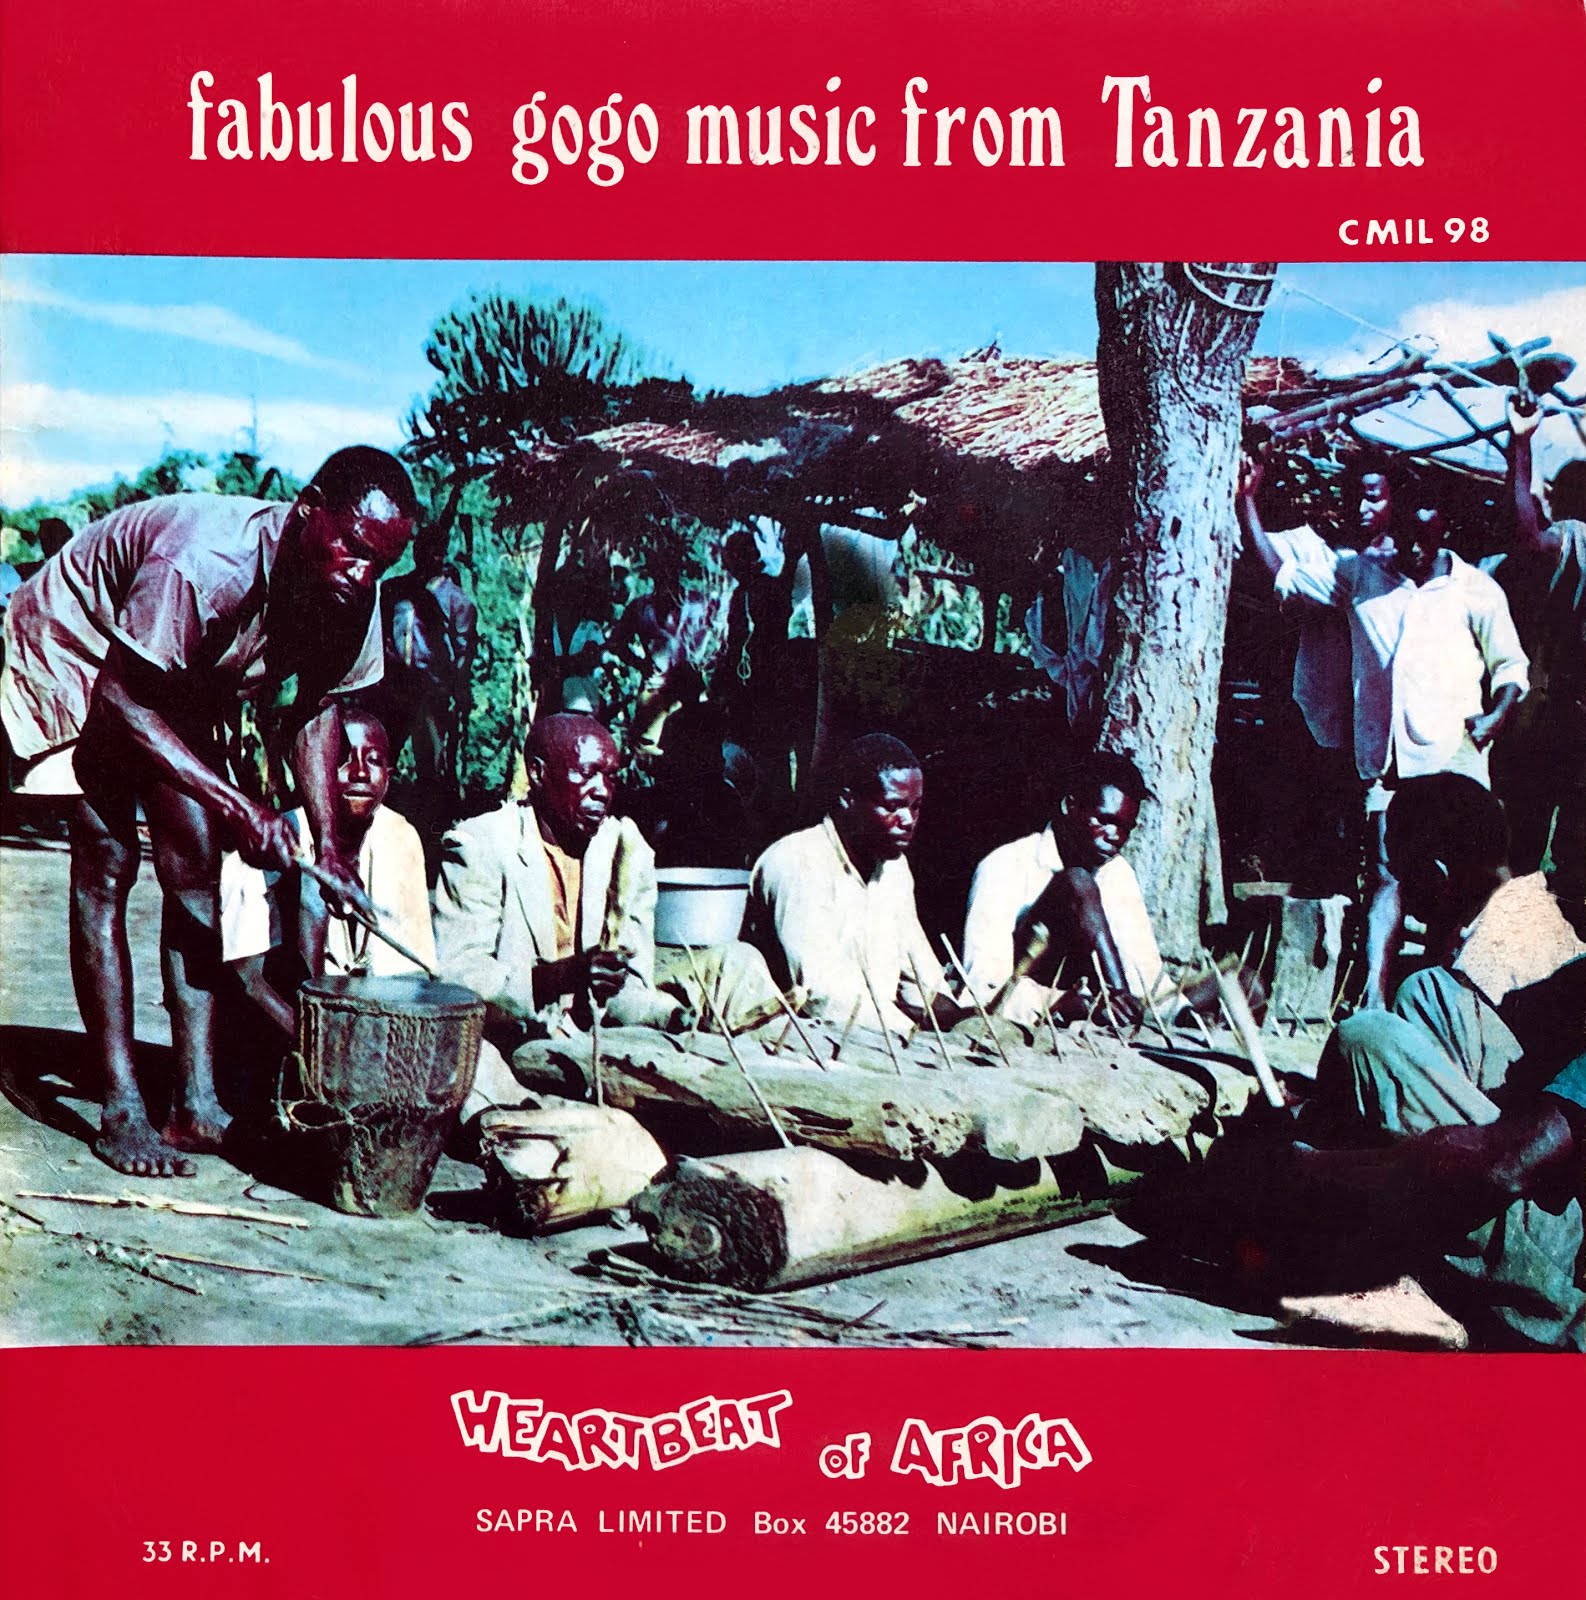 Musicrepublic World Traditional Music From Lps And Cassettes Tanzania Fabulous Gogo Music From Tanzania Heartbeat Of Africa Sapra Ltd Cmil 98